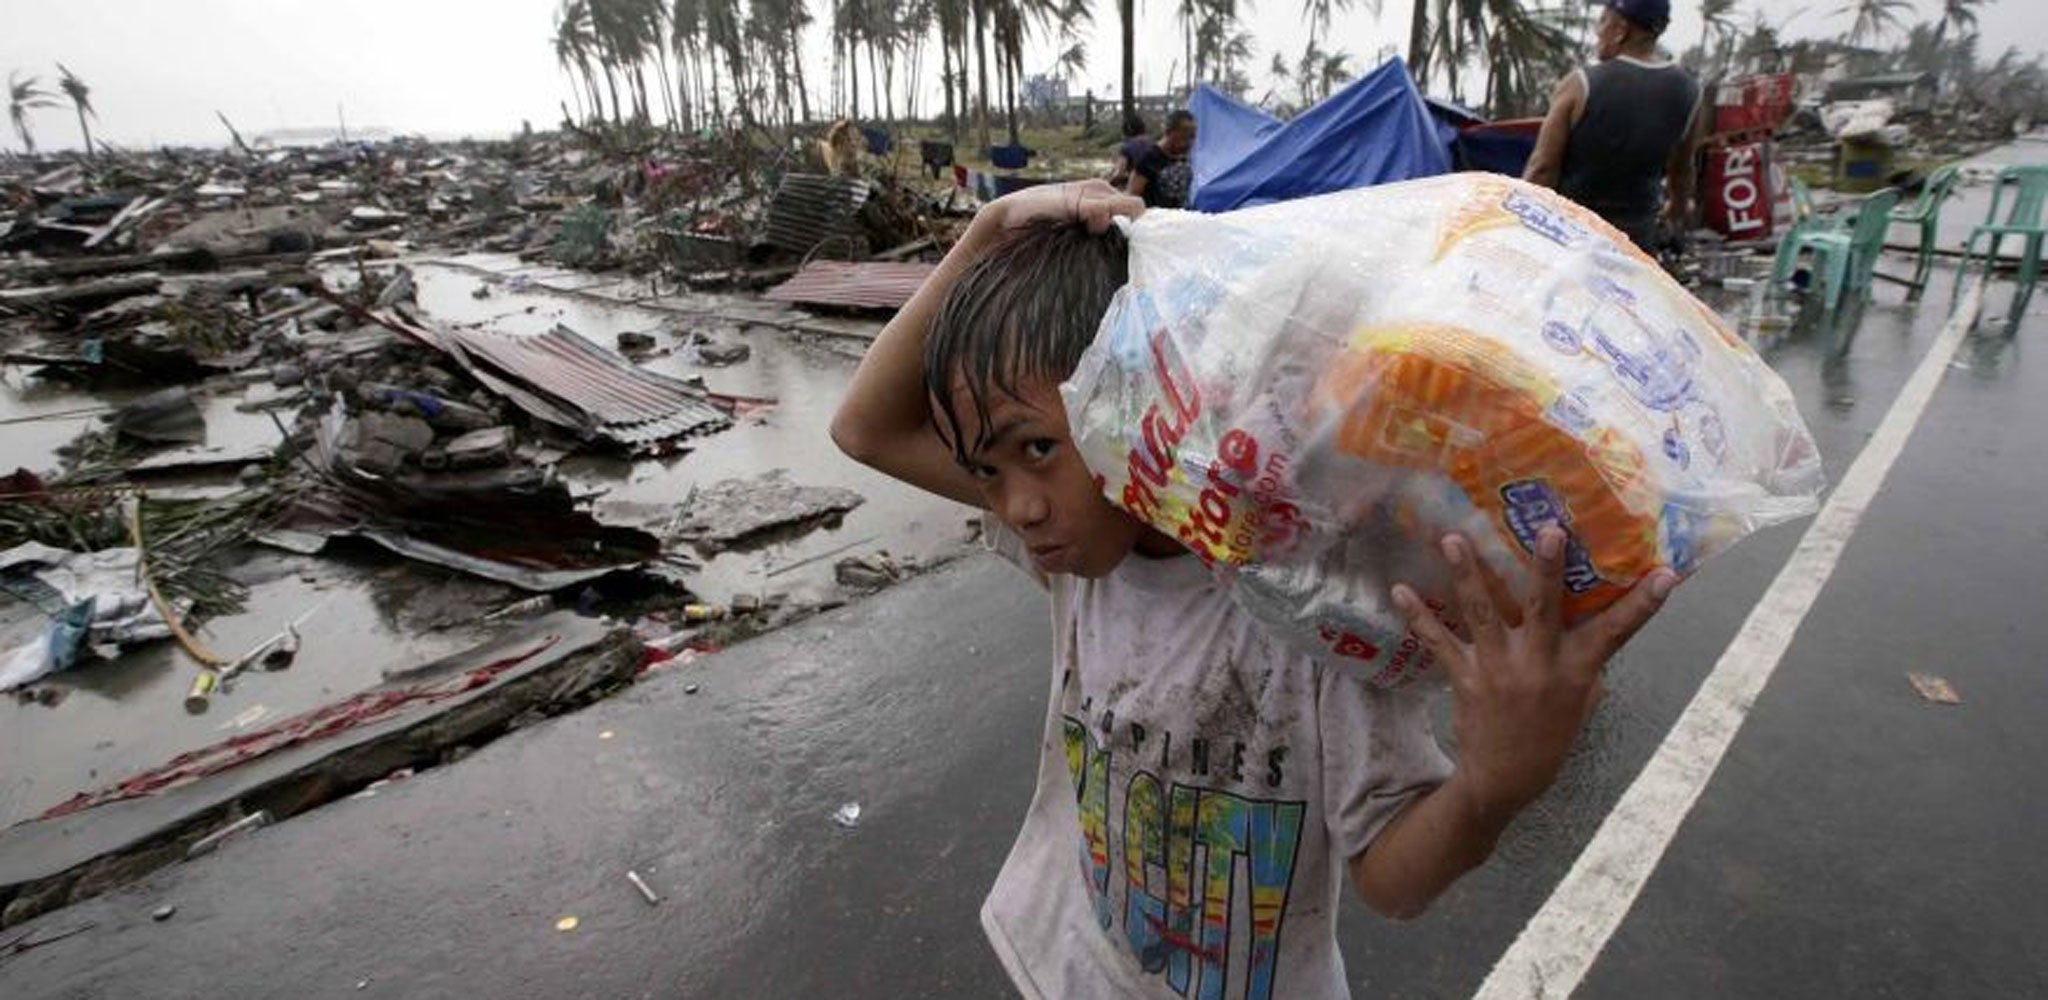 A boy carries relief goods, walking past the devastation caused by Typhoon Haiyan, in Tacloban city, Leyte province, central Philippines